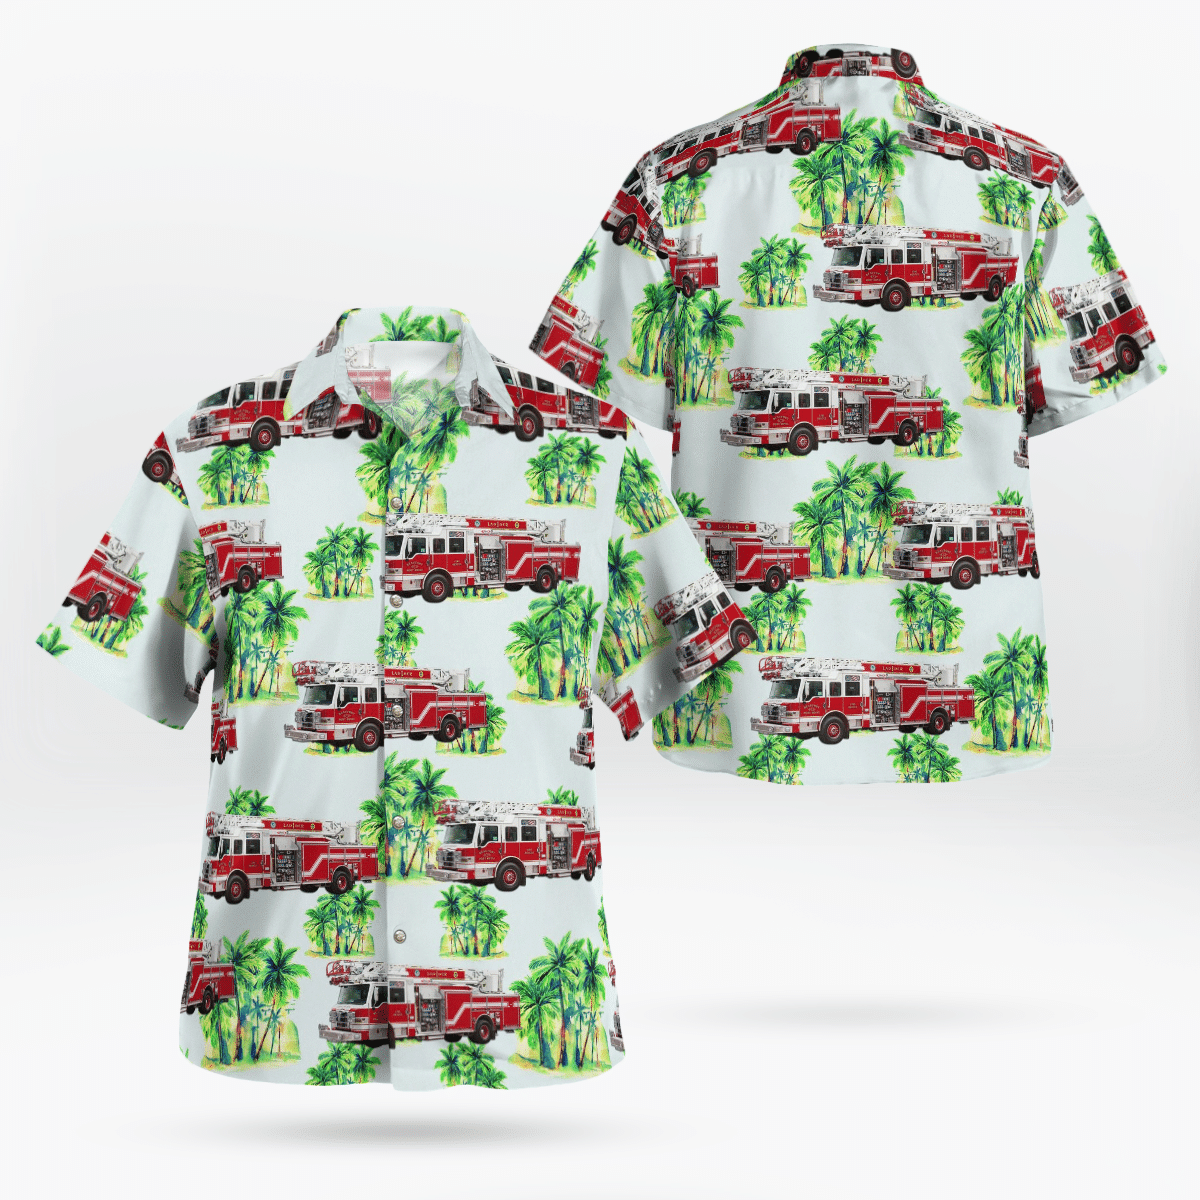 If you want to be noticed, wear These Trendy Hawaiian Shirt 73